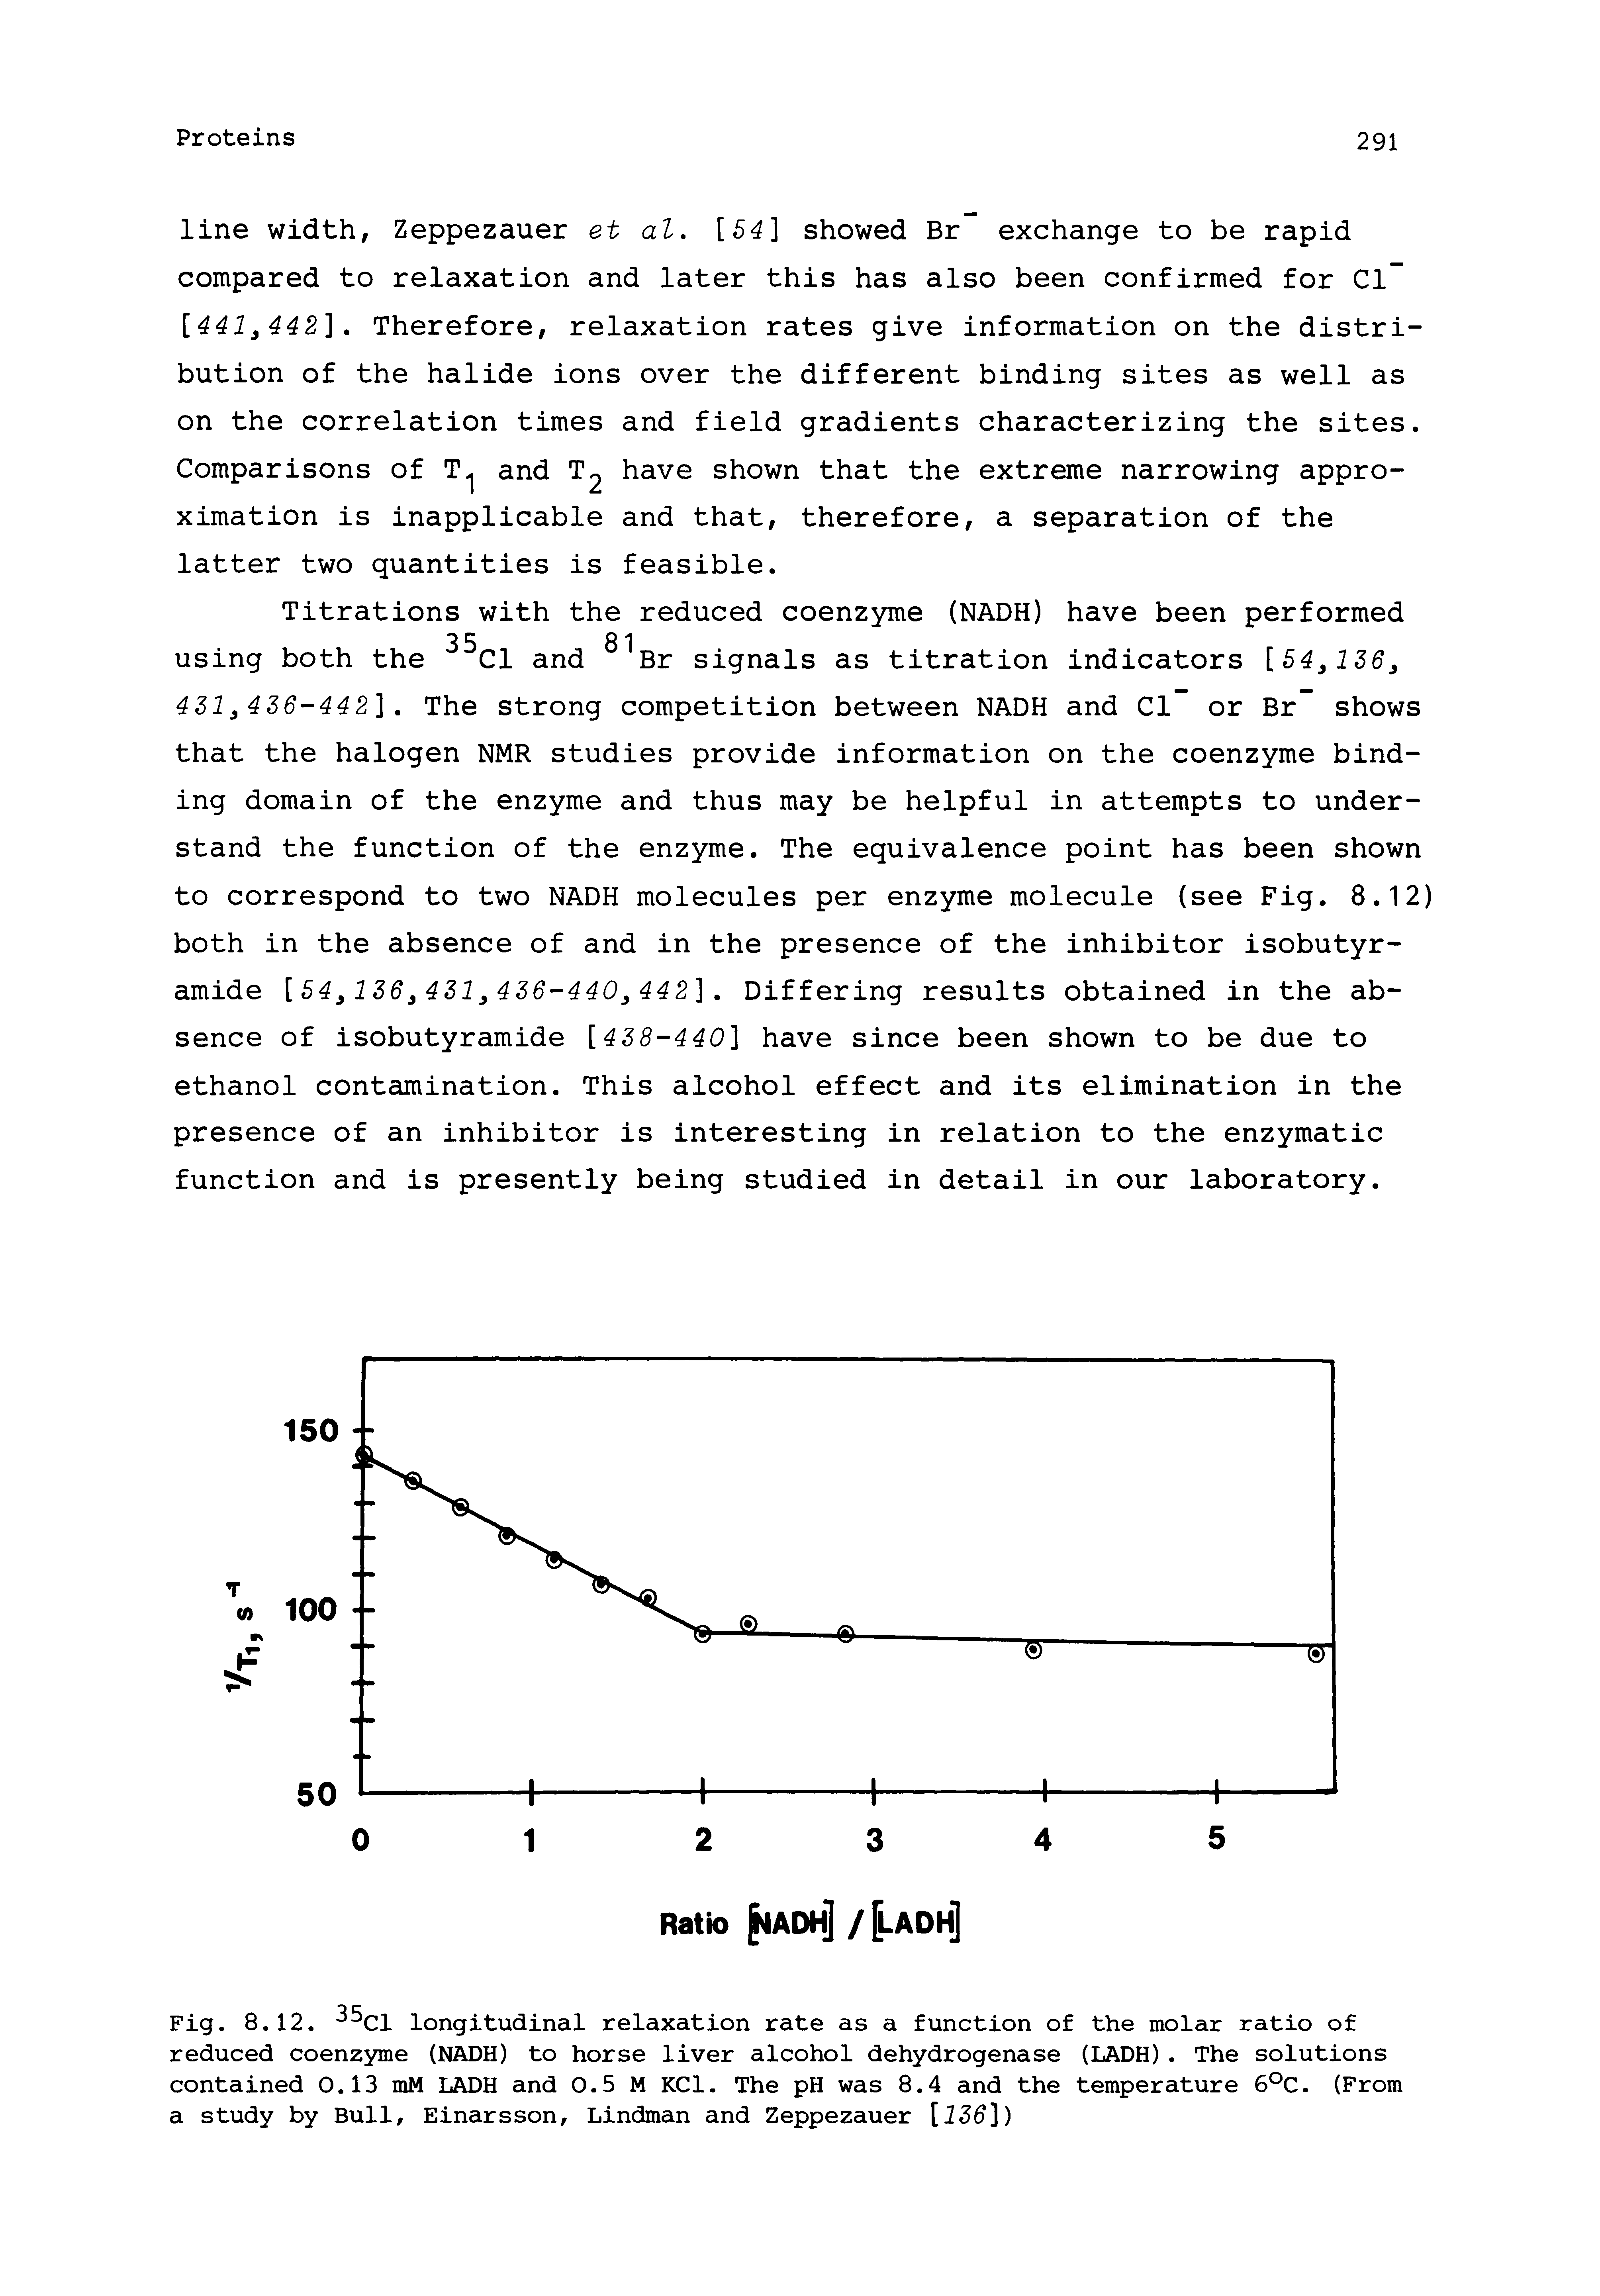 Fig. 8.12. Cl longitudinal relaxation rate as a function of the molar ratio of reduced coenzyme (NADH) to horse liver alcohol dehydrogenase (LADH). The solutions contained 0.13 mM LADH and 0.5 M KCl. The pH was 8.4 and the temperature 6°C. (From a study by Bull, Einarsson, Lindman and Zeppezauer [136])...